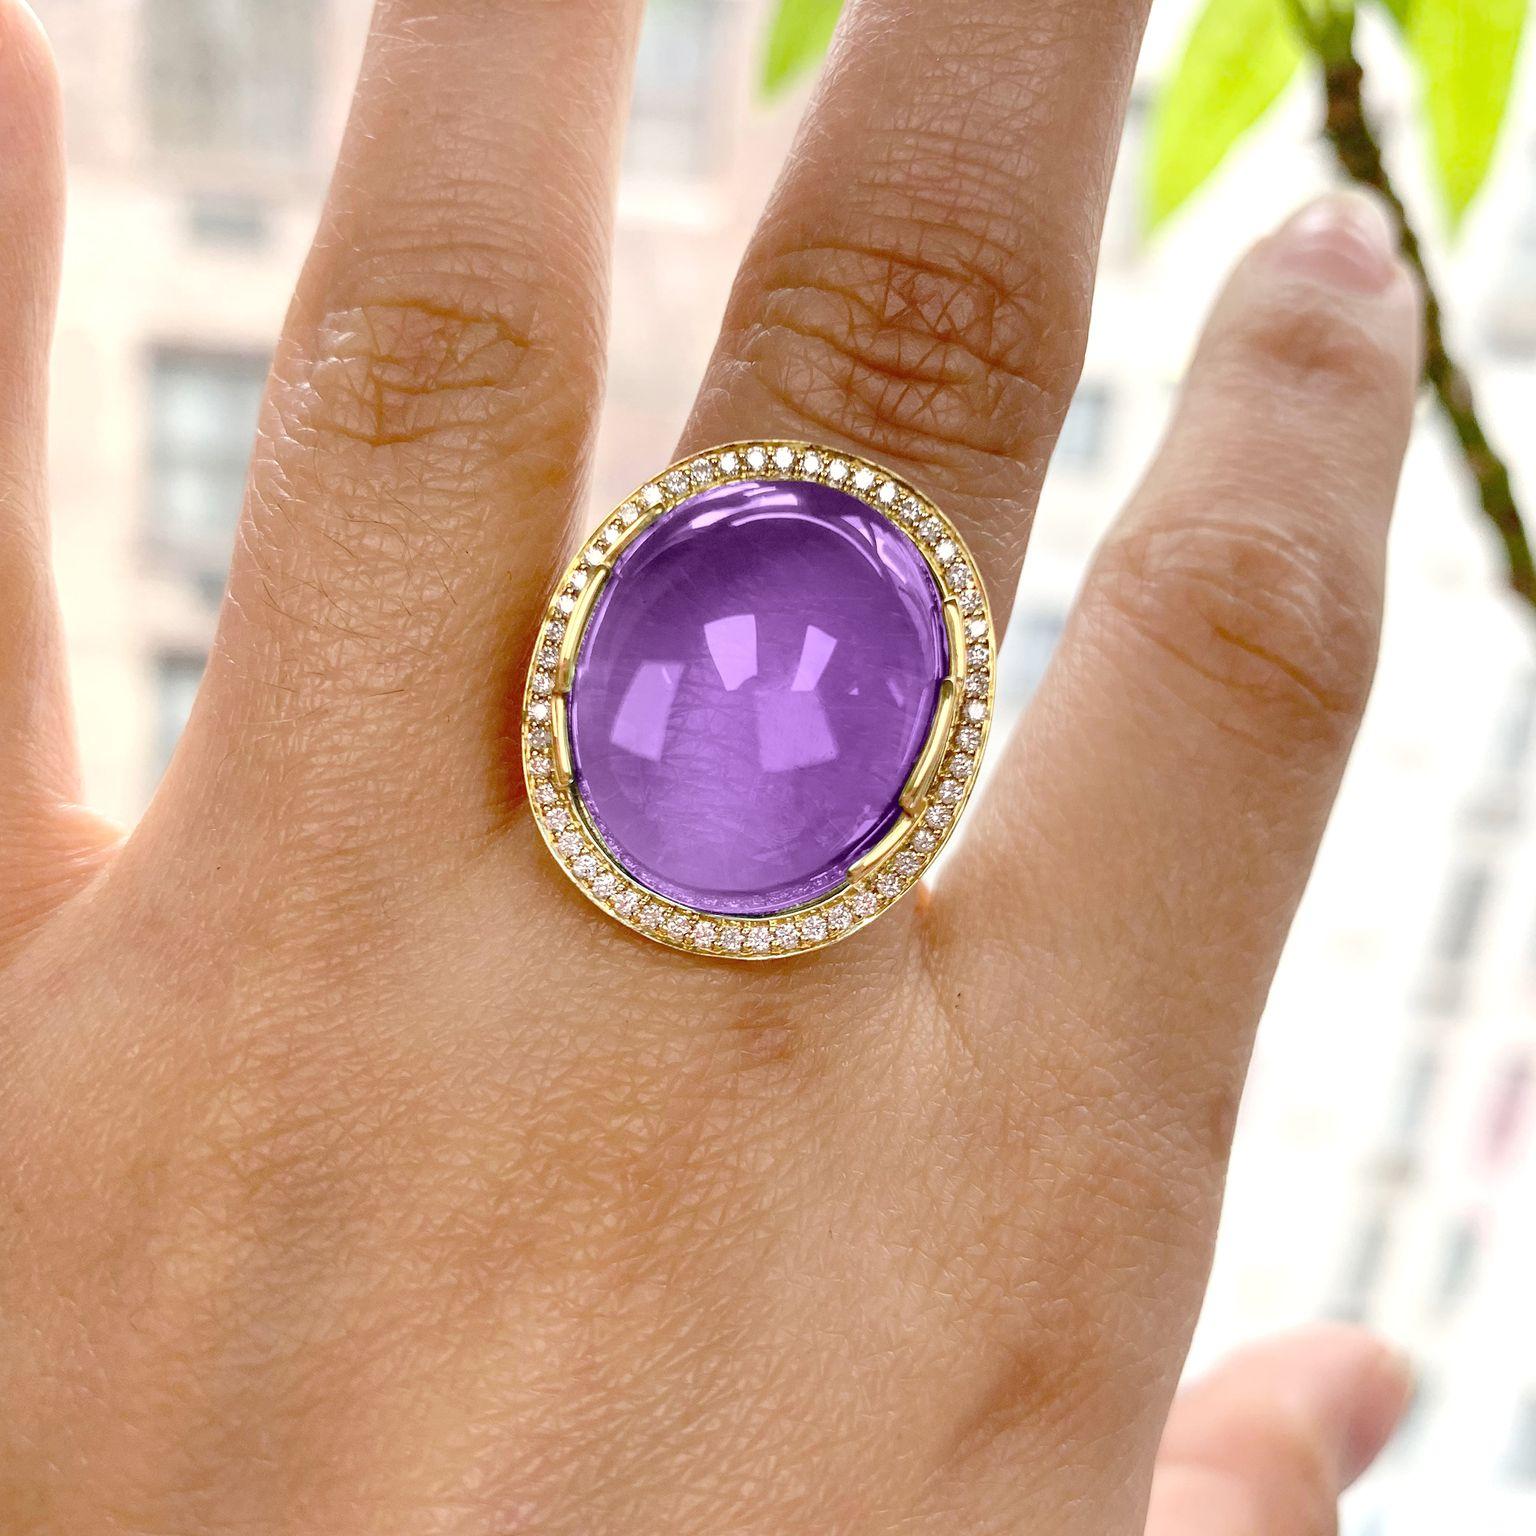 Amethyst Oval Cabochon Ring in 18K Yellow Gold, from 'Rock N Roll' Collection. Extensive collection of big and bold pieces. Like the music, this Rock ‘n Roll collection is electric in color and very stimulating to the eye. These exciting colors and